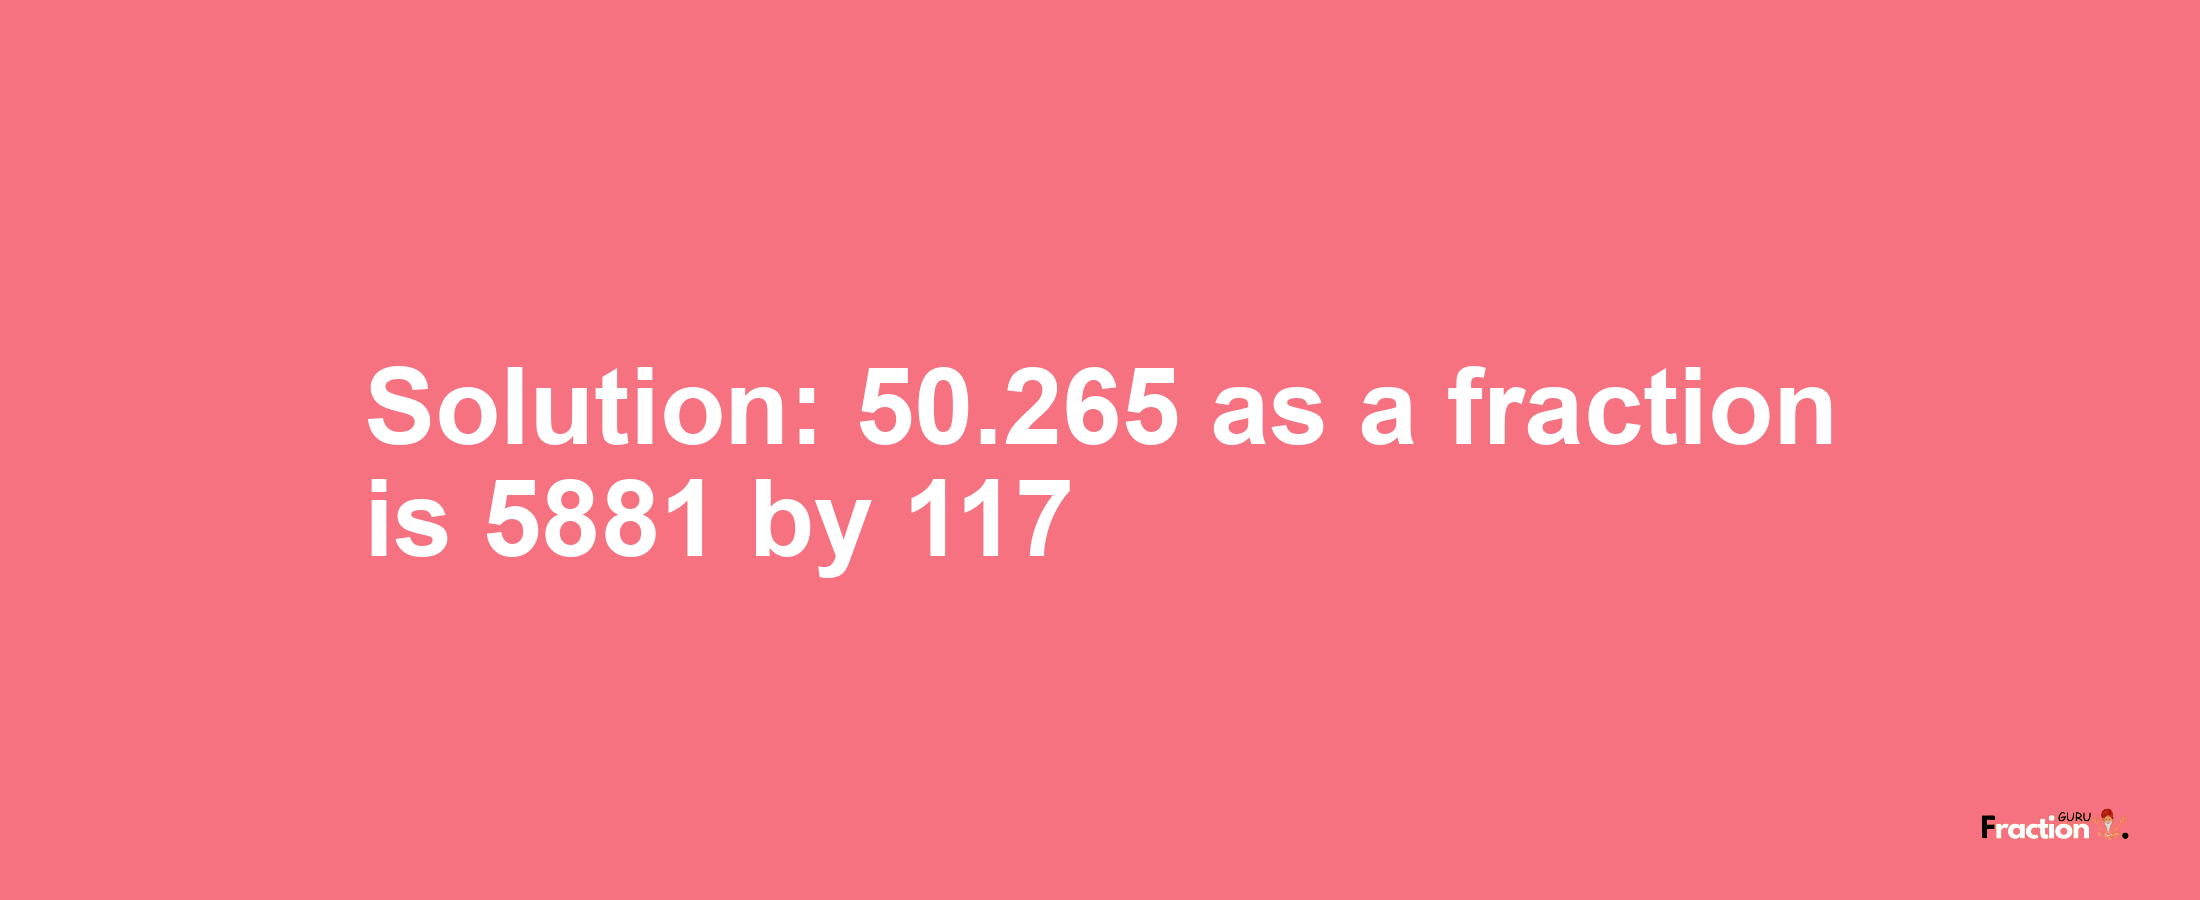 Solution:50.265 as a fraction is 5881/117